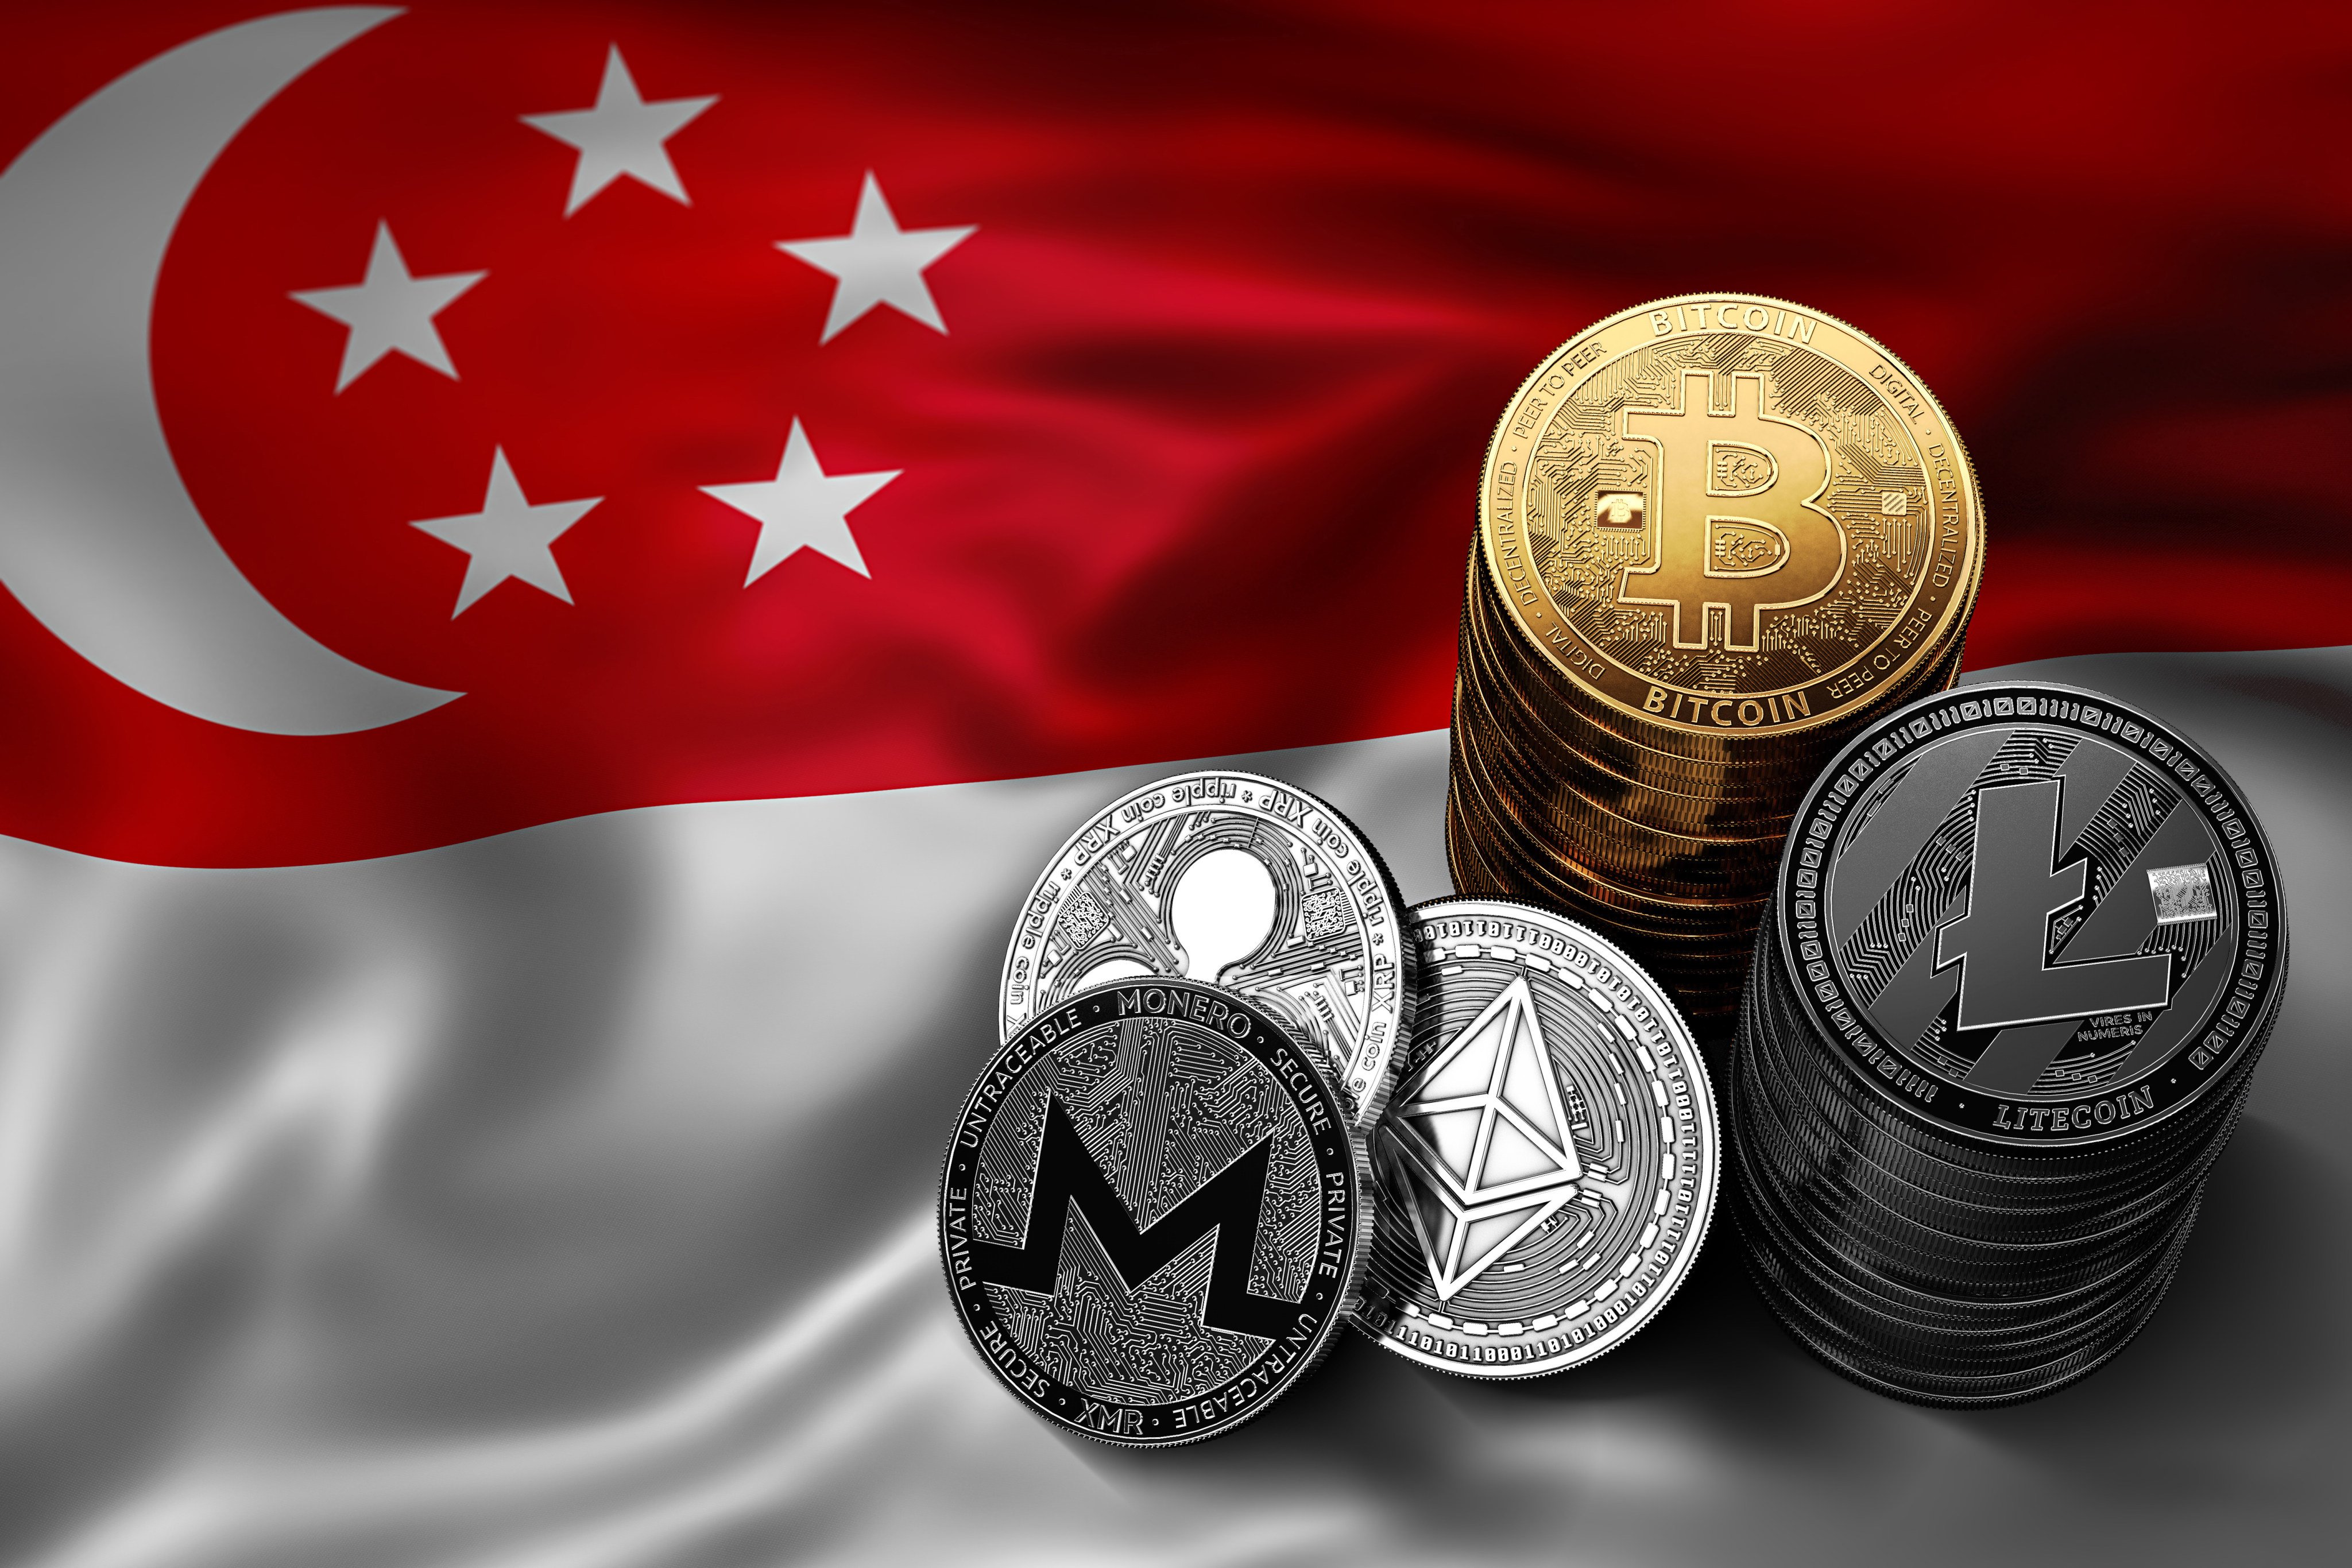 Singapore tells cryptocurrency exchange Binance to stop payment services  over possible law breach | South China Morning Post